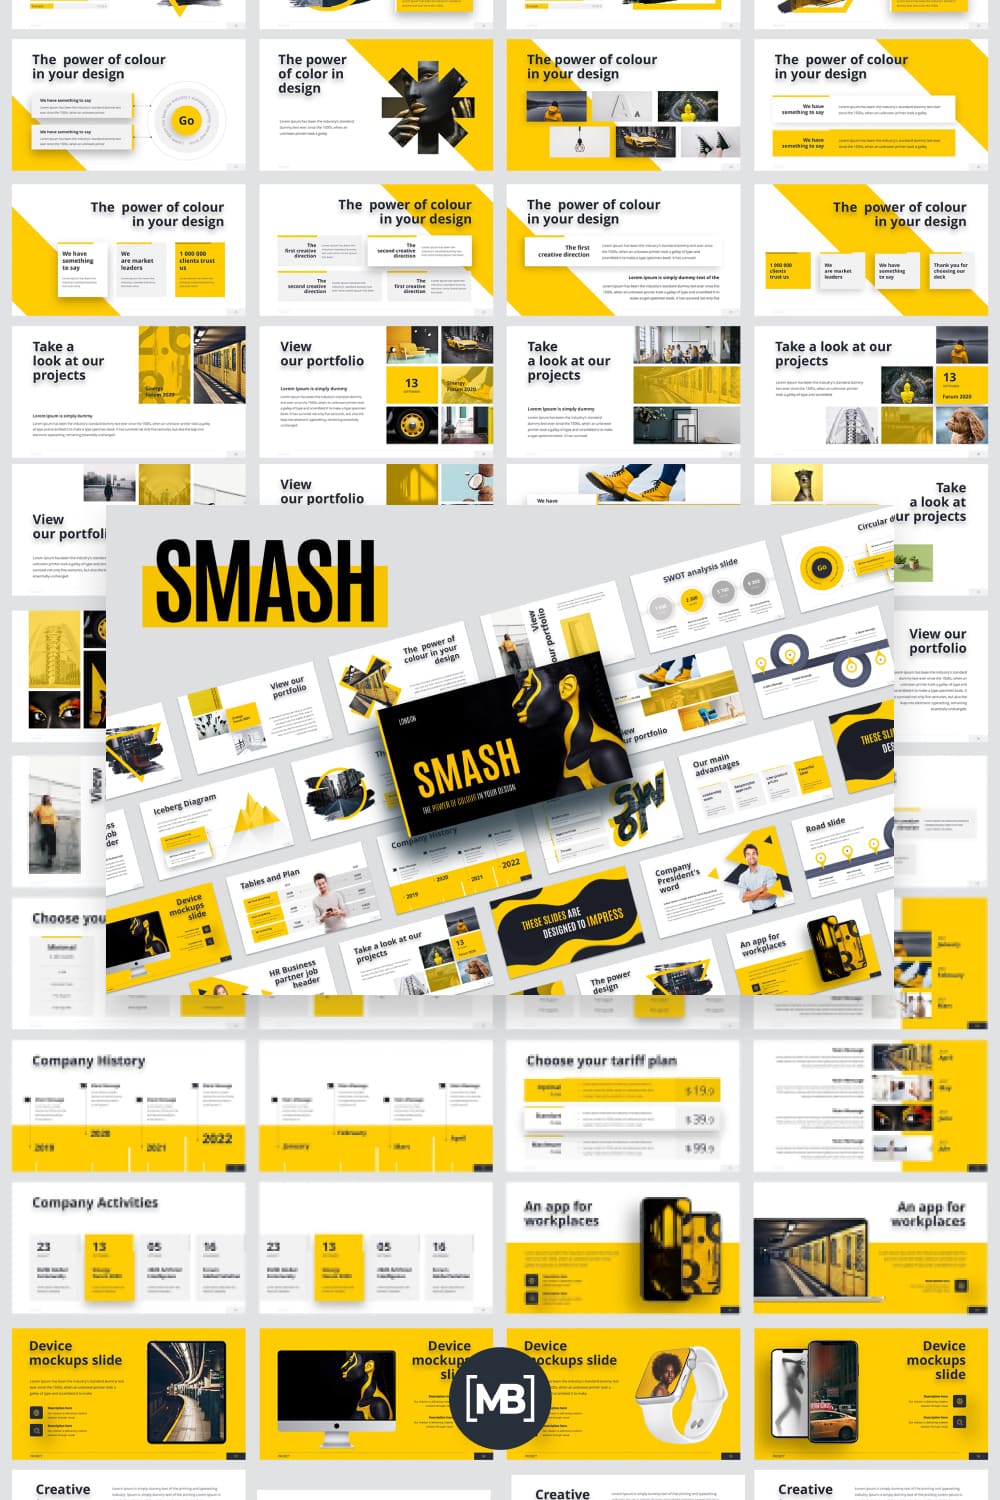 Smash animated powerpoint template.